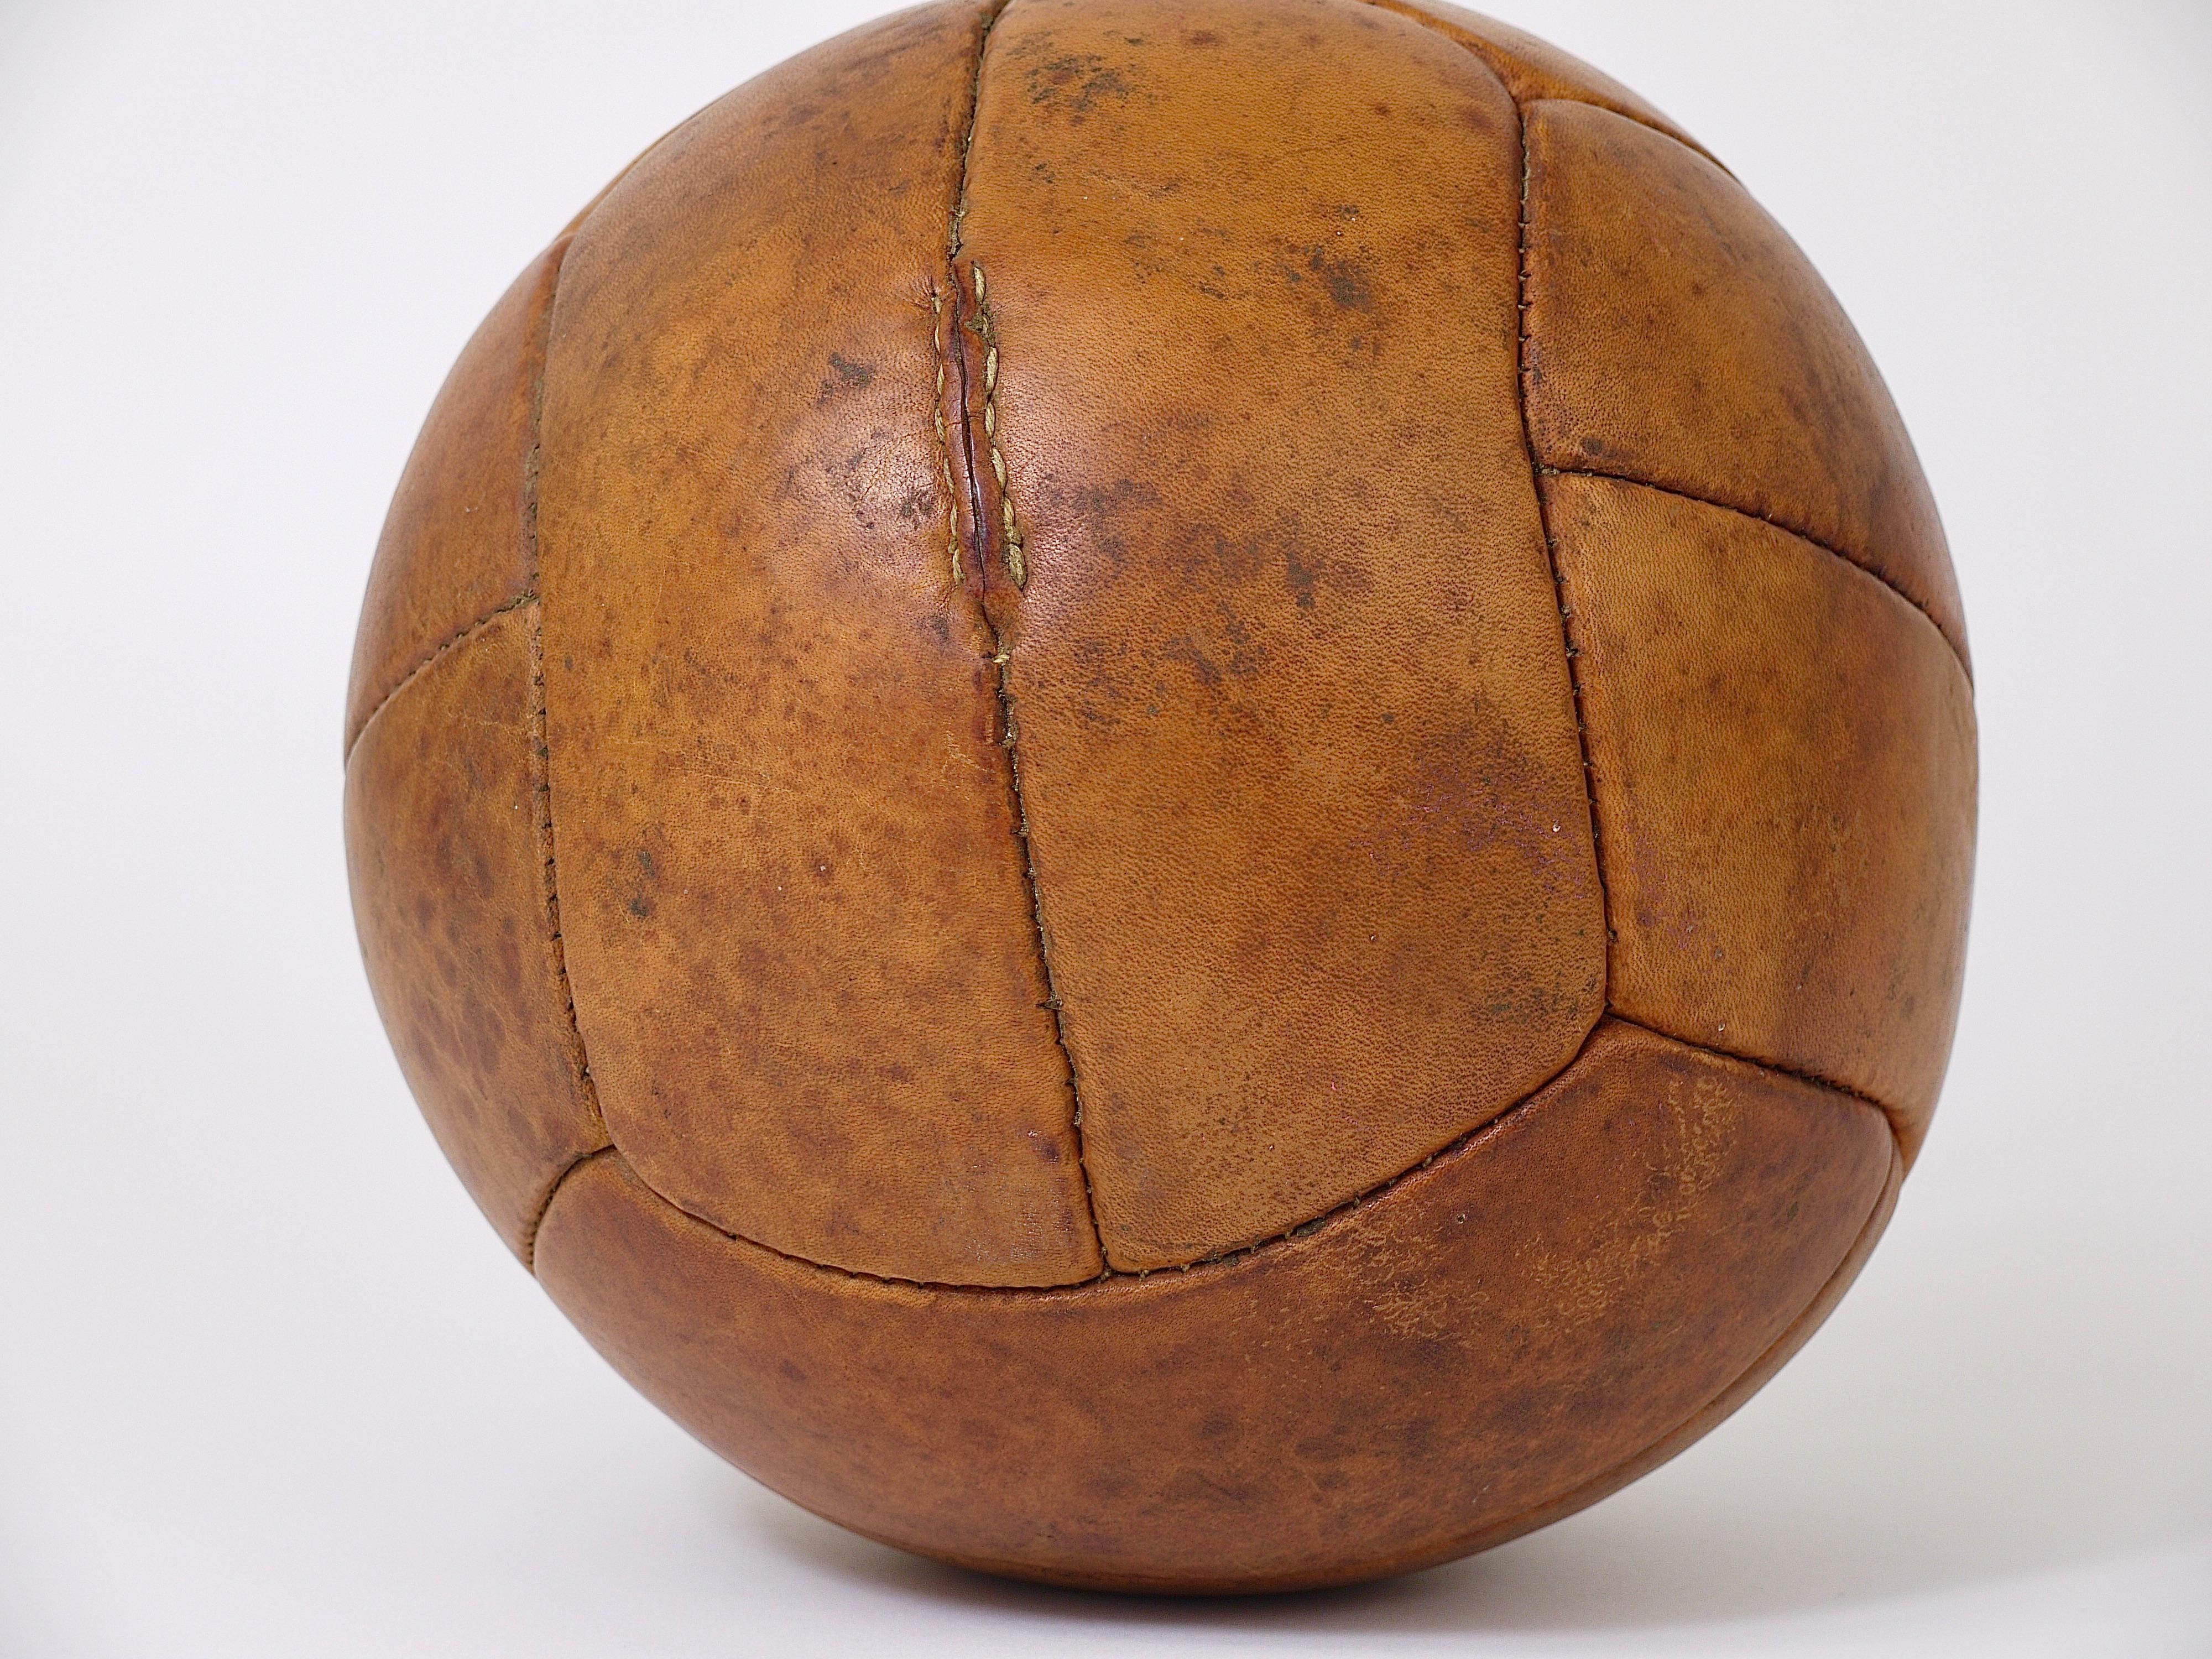 Hand-Crafted Vintage 1930s Tan Leather Medicine Ball from a Gym, Czech Republic, 1930s